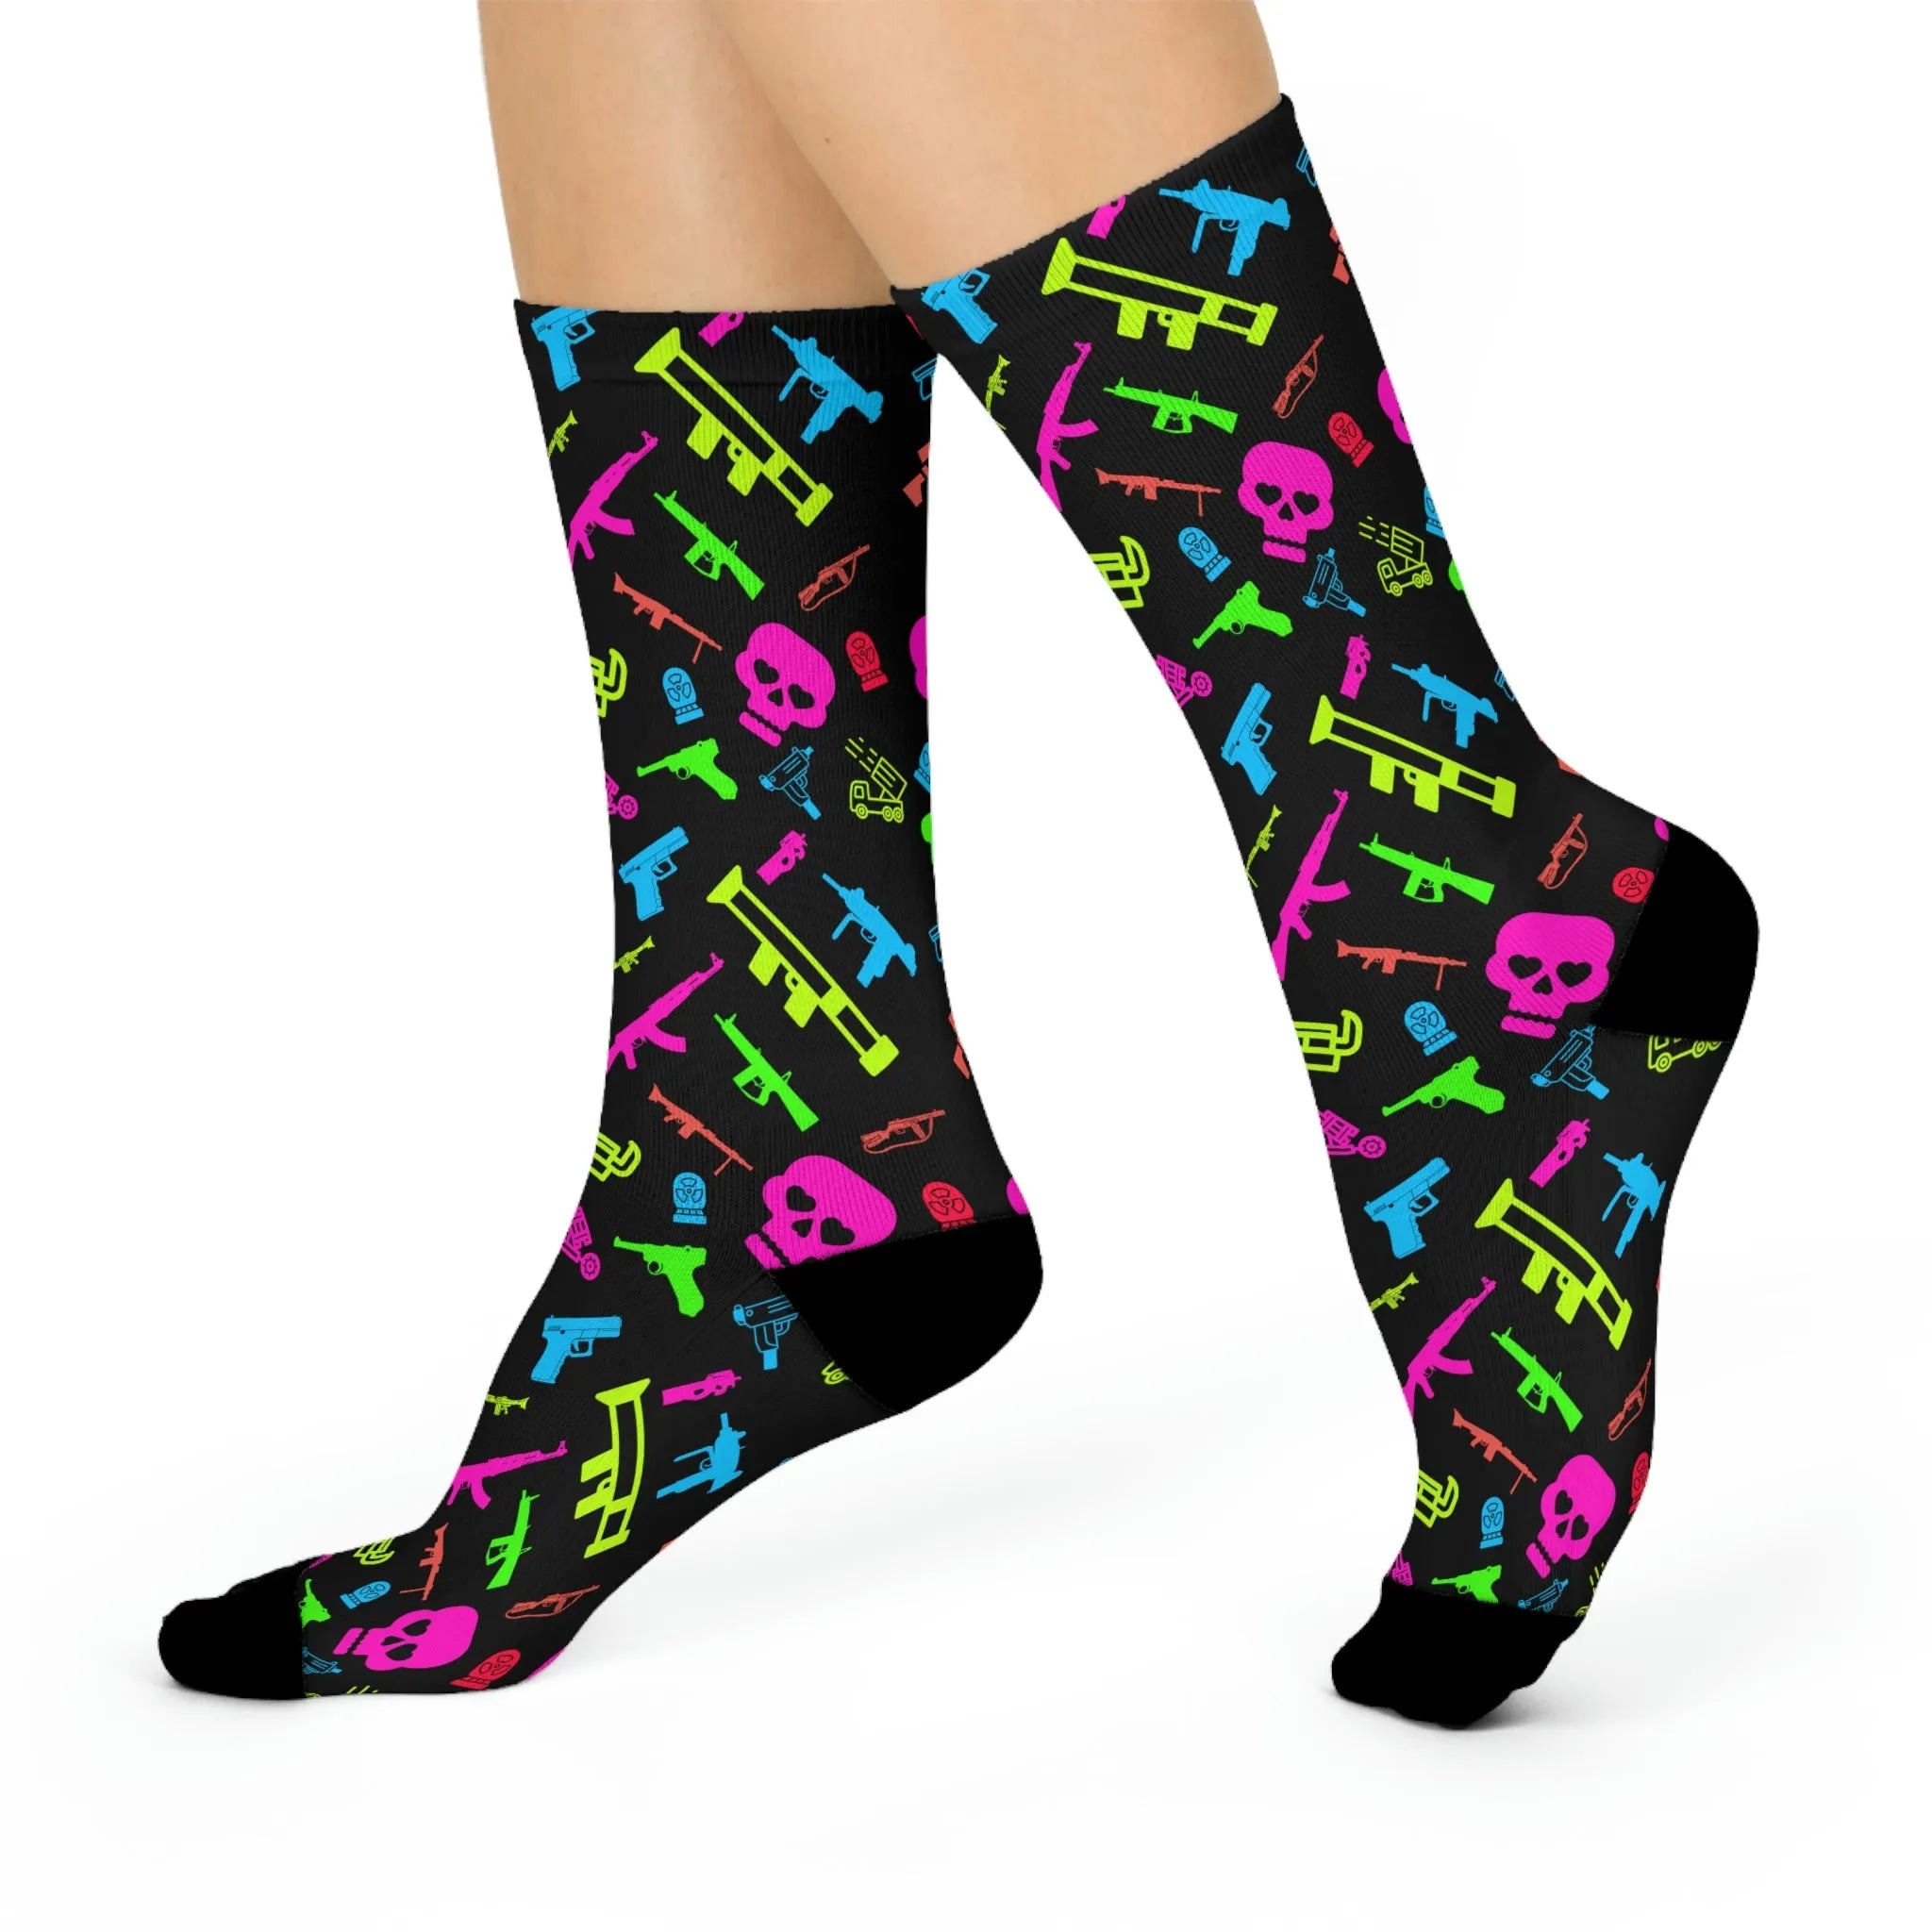 "Right to Bare Feet" Cushioned Crew Socks